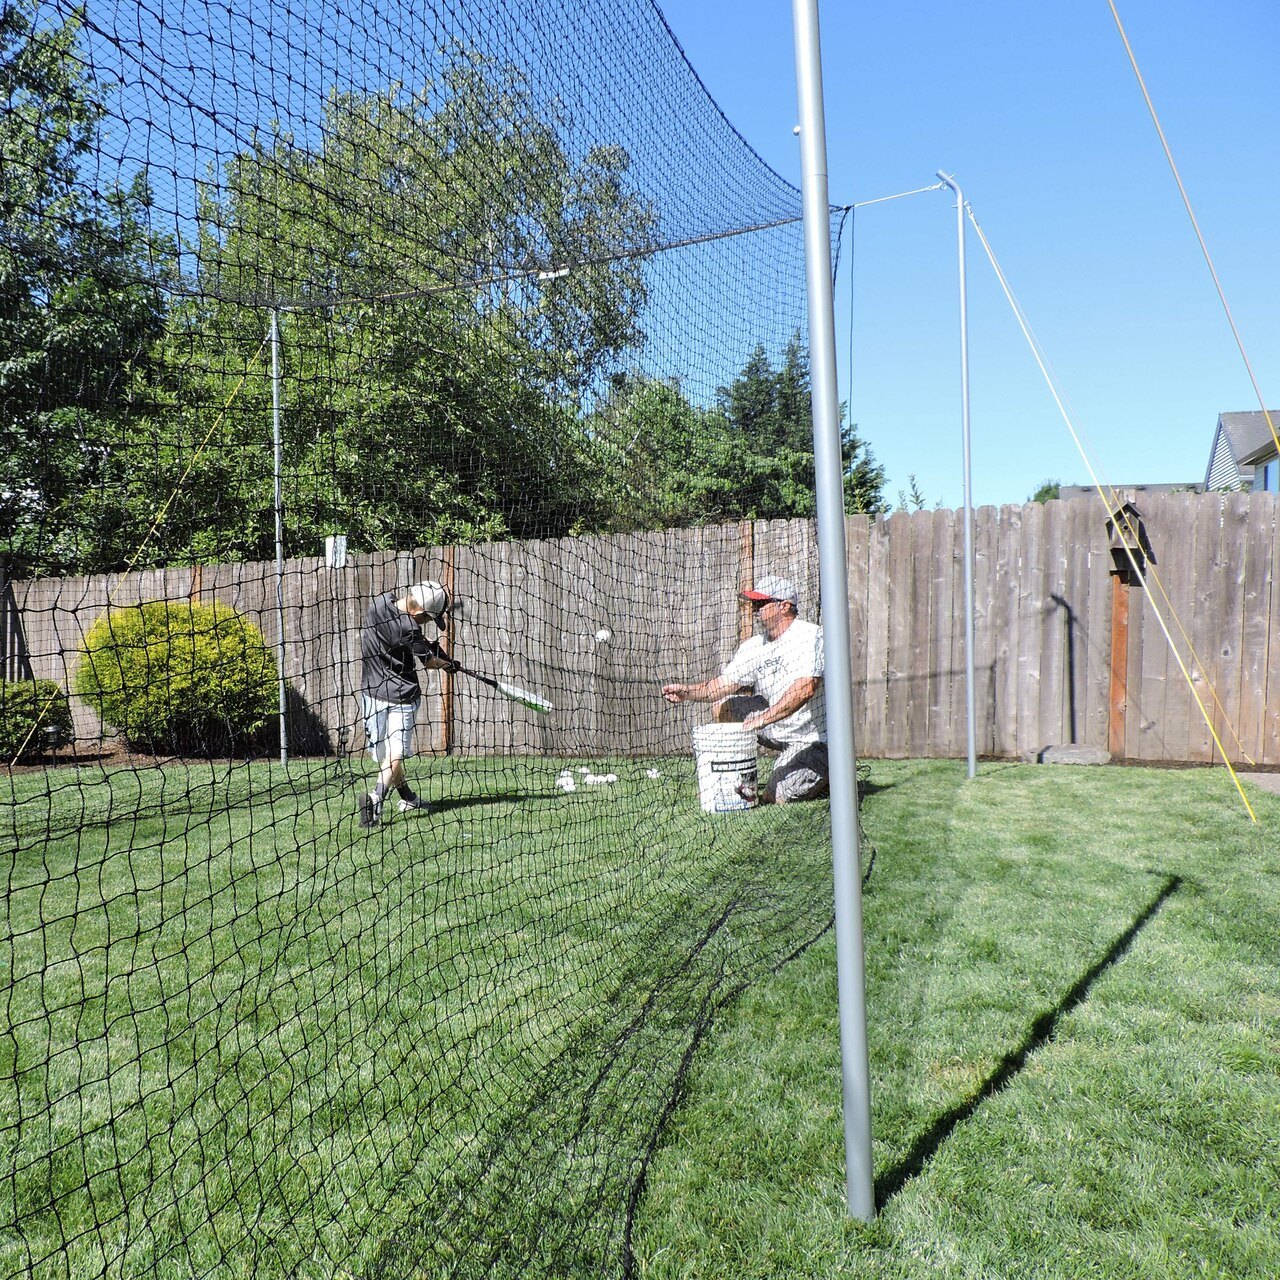 Jugs Hit at Home Complete Backyard Batting Cage Close Up Pole